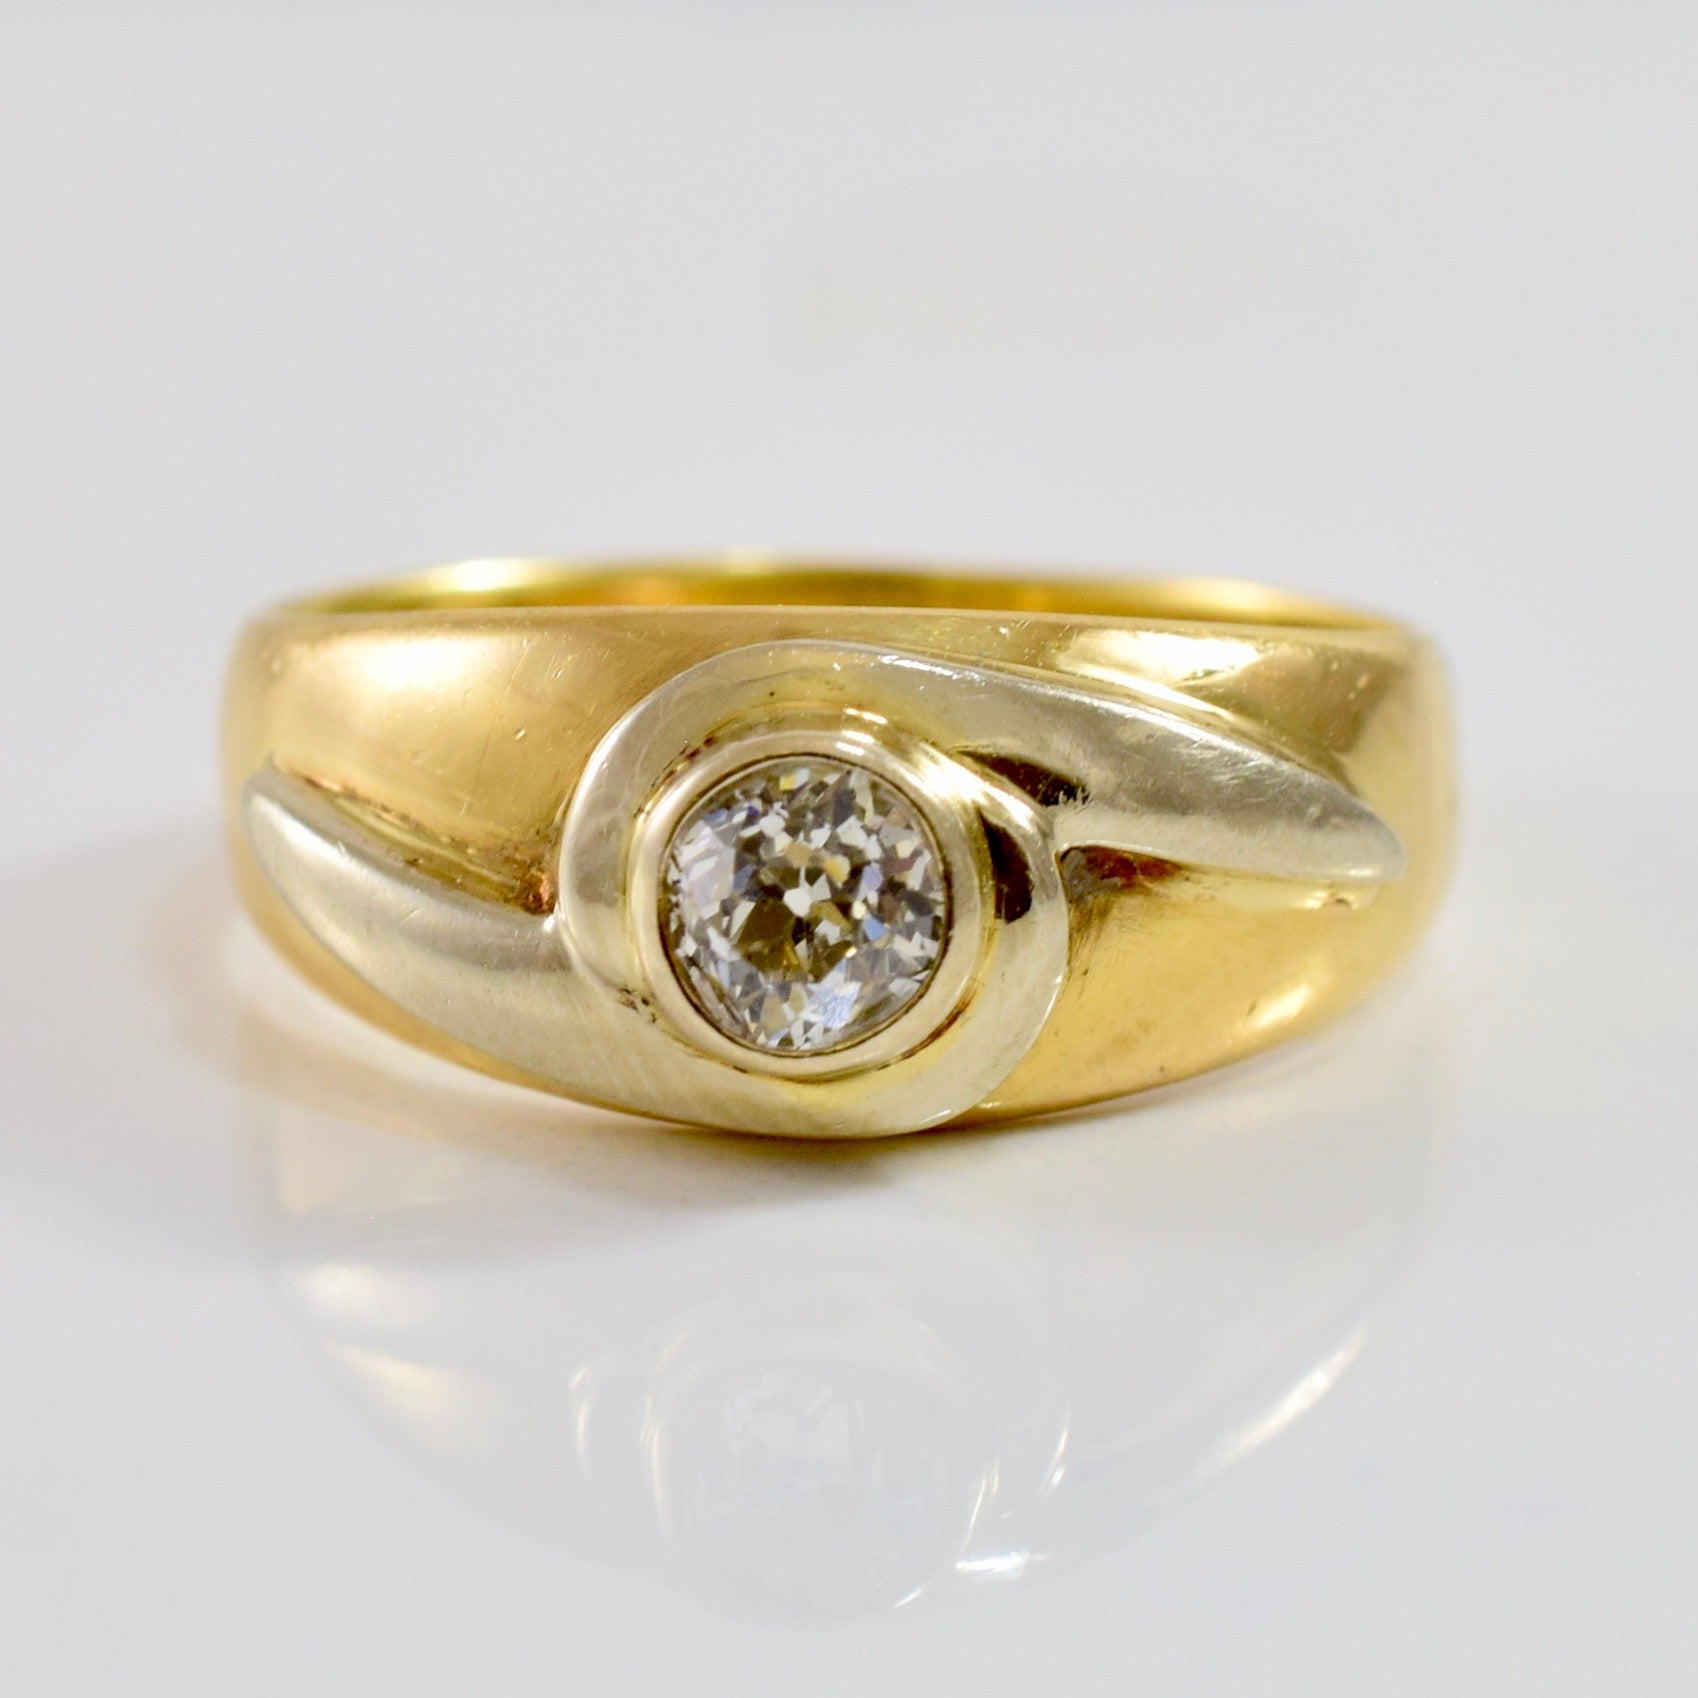 Vintage engagement ring from england, gold single cut diamond antique ring